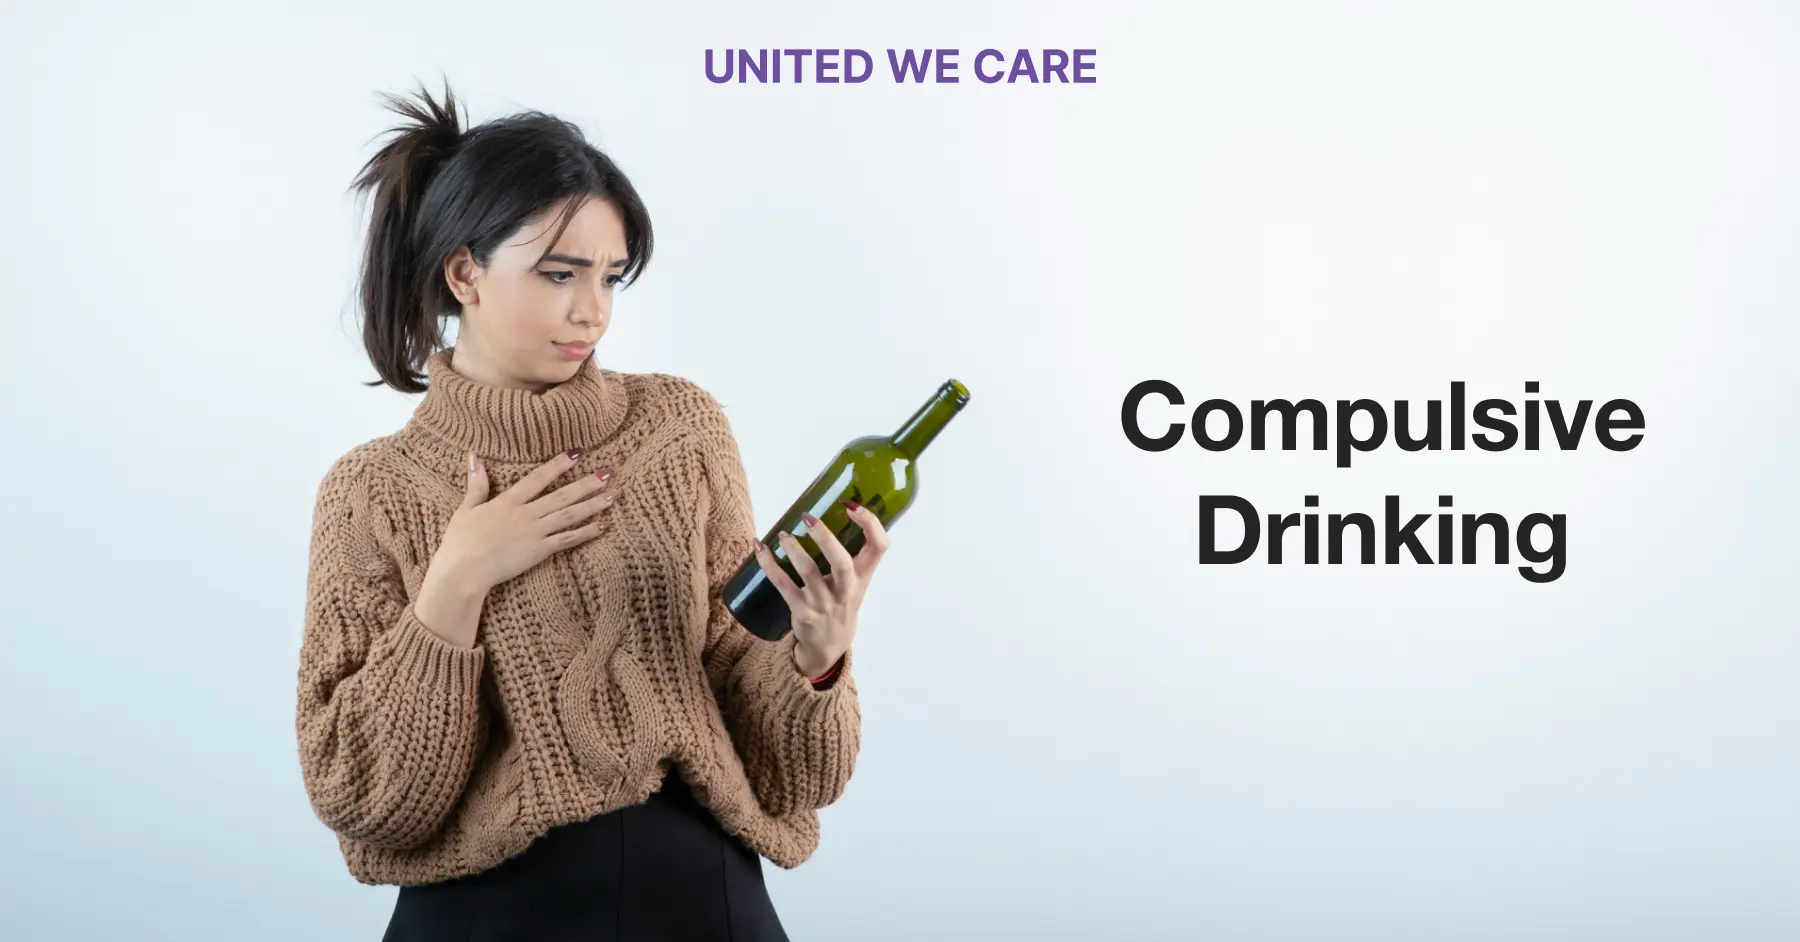 Compulsive Drinking: 5 Important Tips To Overcome It